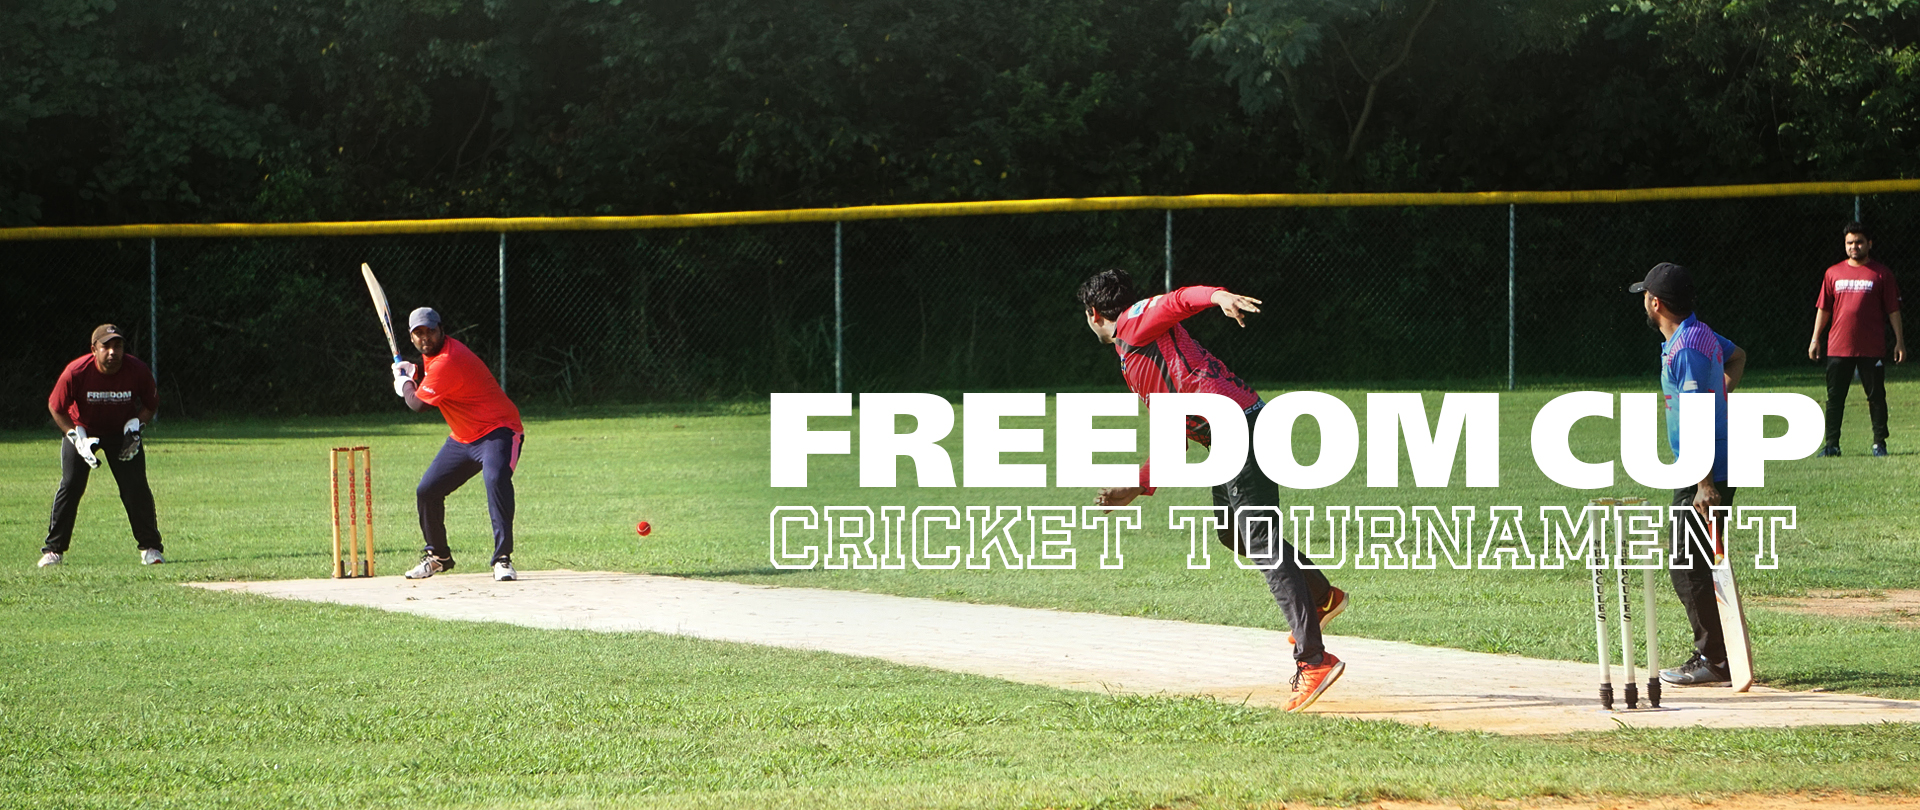 Freedom Cup Cricket
Saturdays, July 9 – August 13
Interest Meeting, May 22, 12:30 PM
